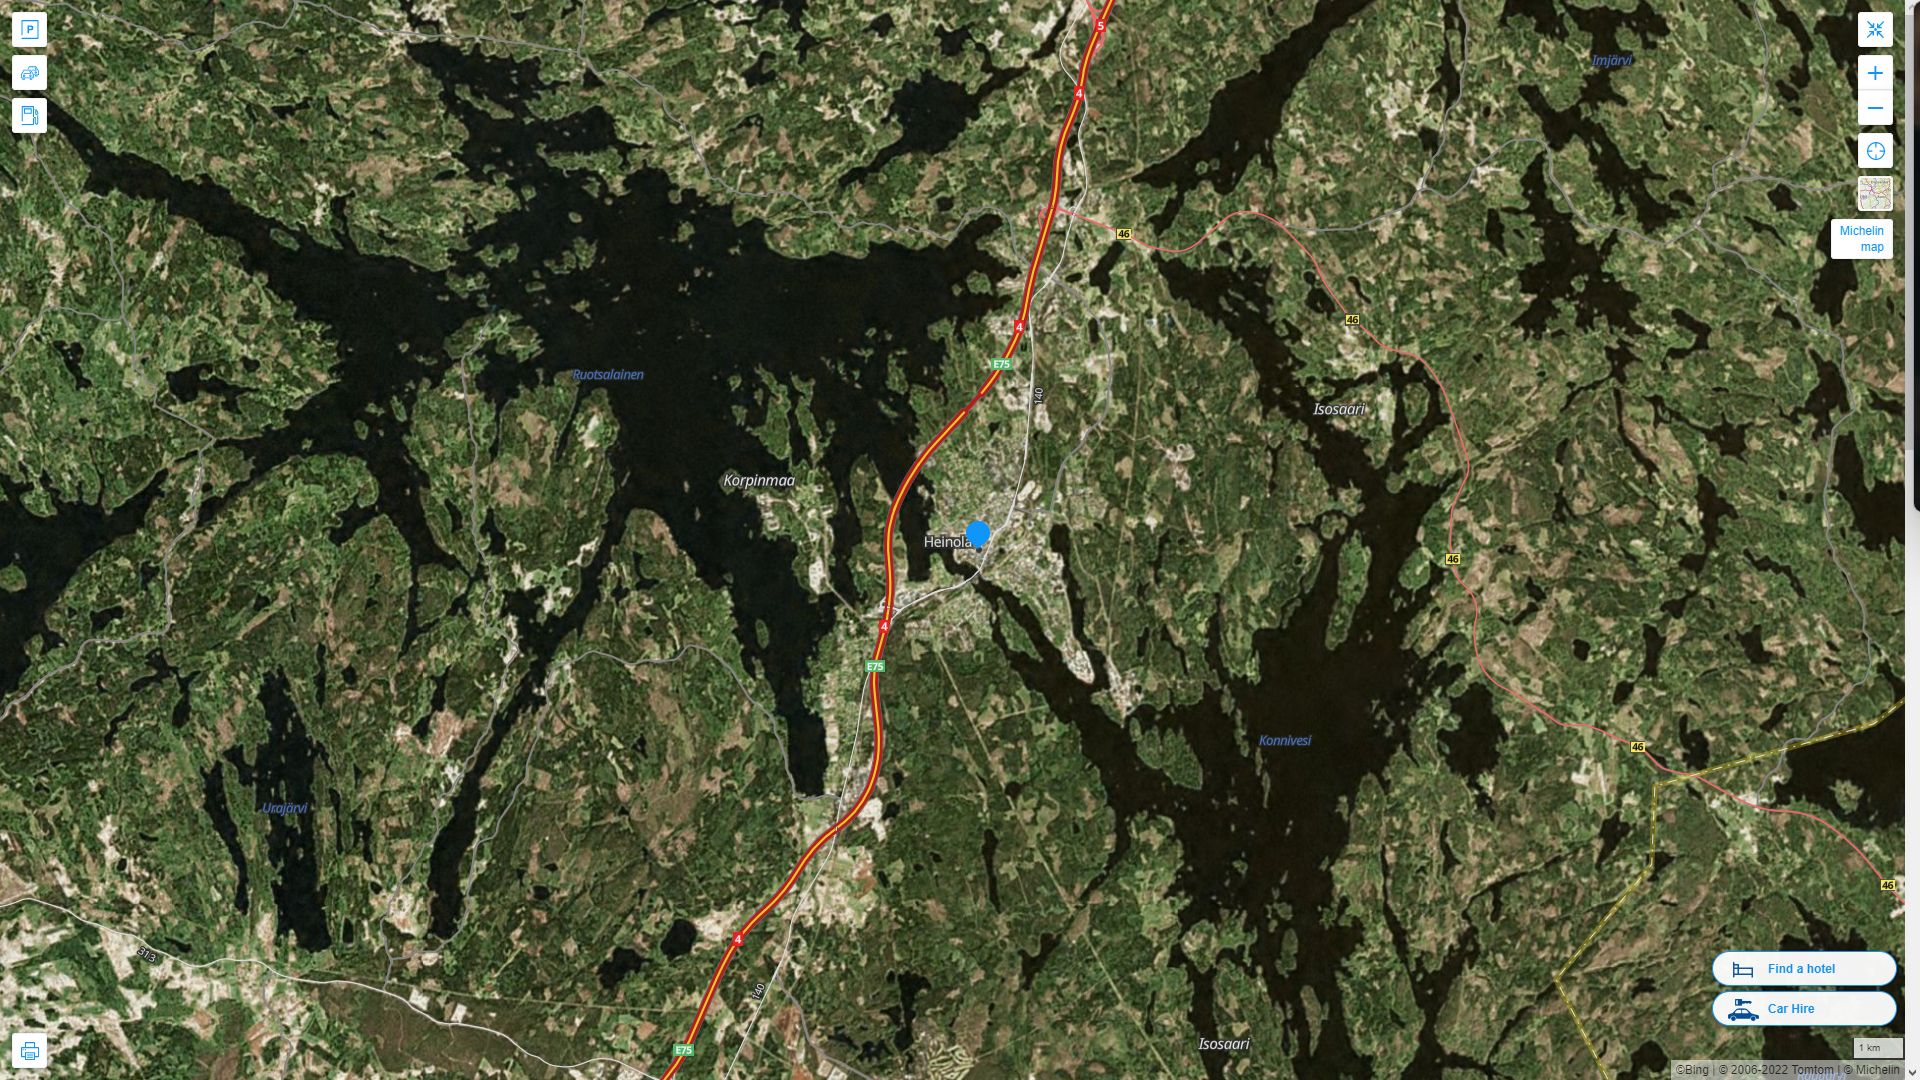 Heinola Highway and Road Map with Satellite View